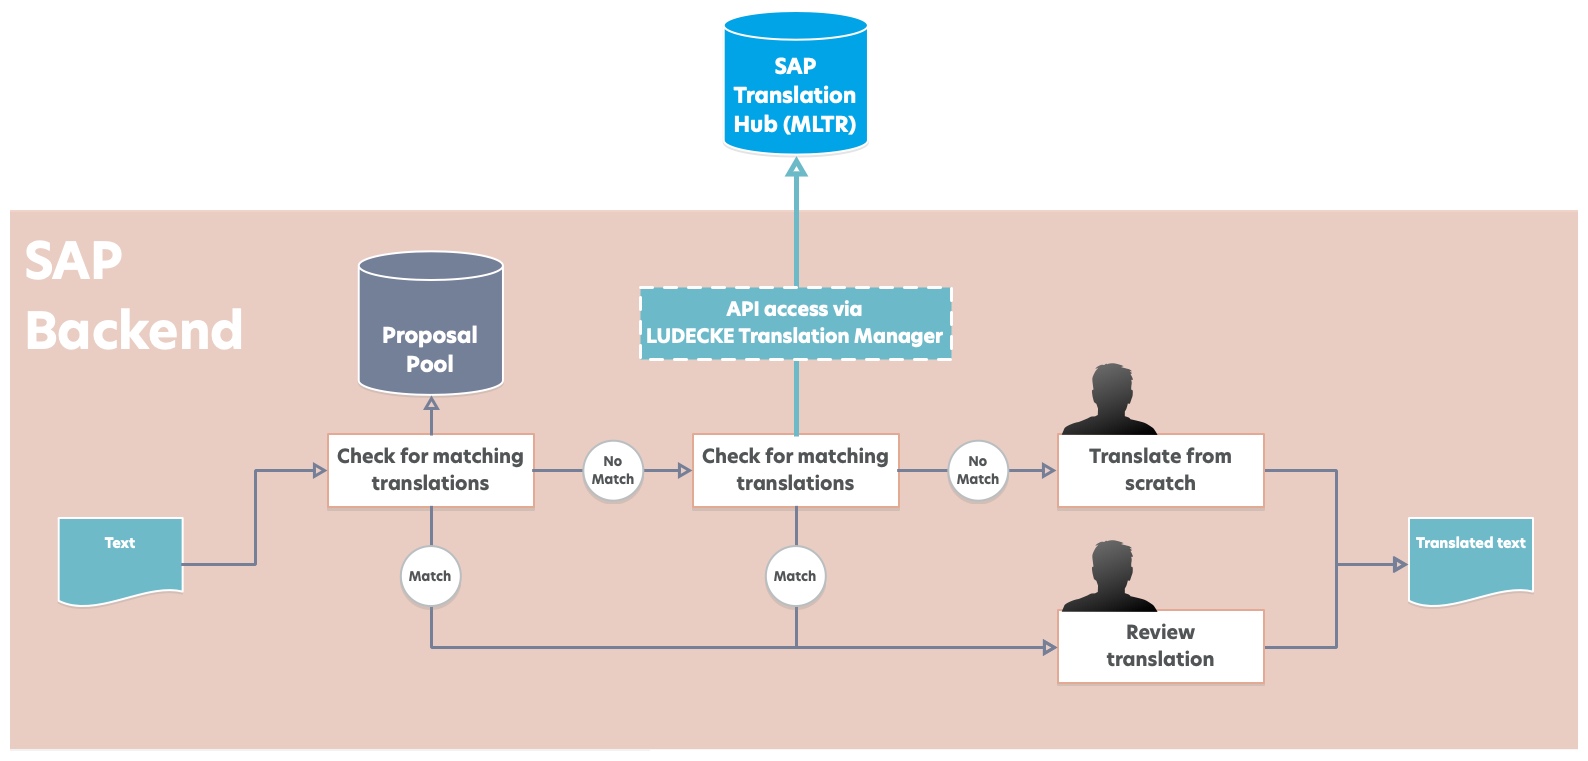 The text flow with SAP Translation Hub and LUDECKE Translation Manager